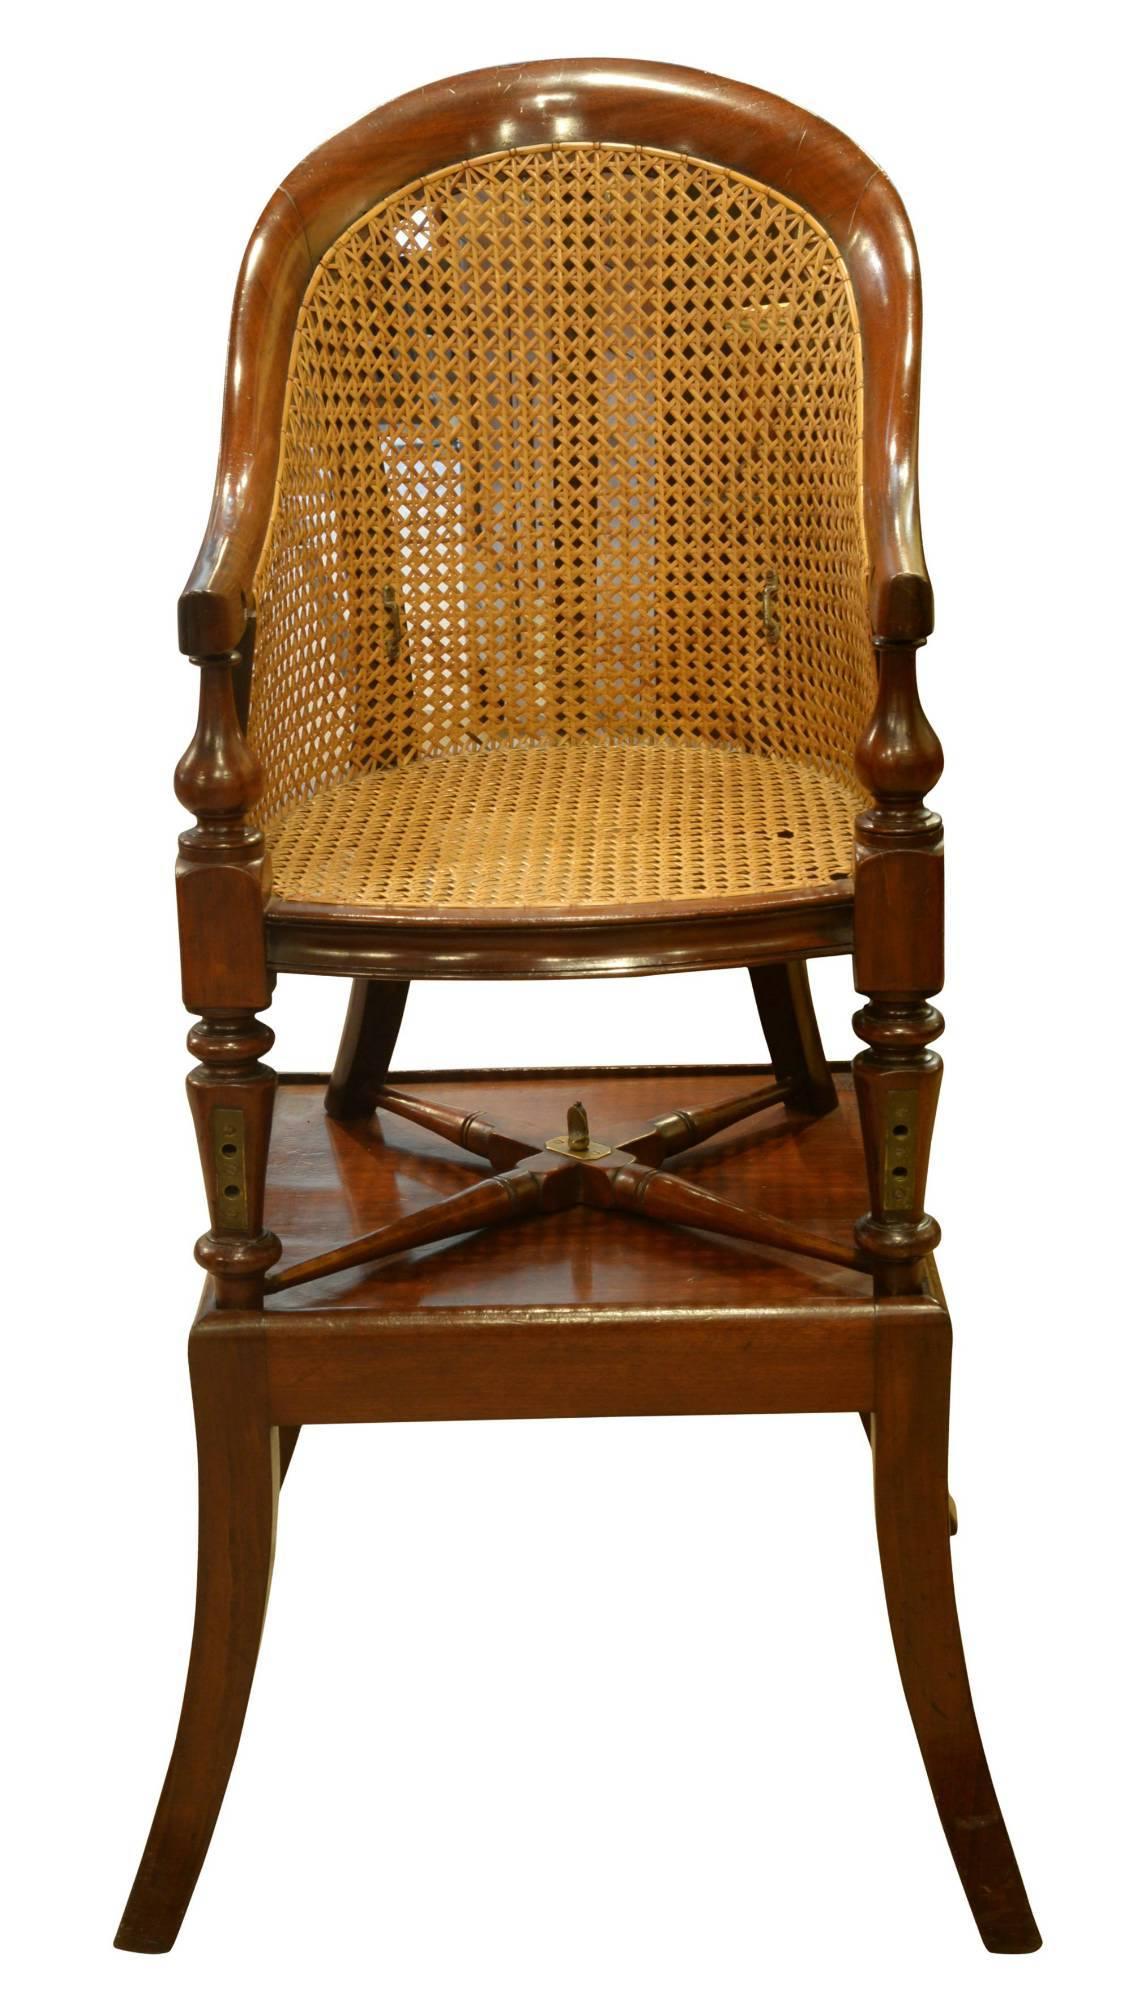 A William IV childs mahogany bergere high chair with swept back, turned legs and stretchers. Detachable from its original table stand,

circa 1830-1840.